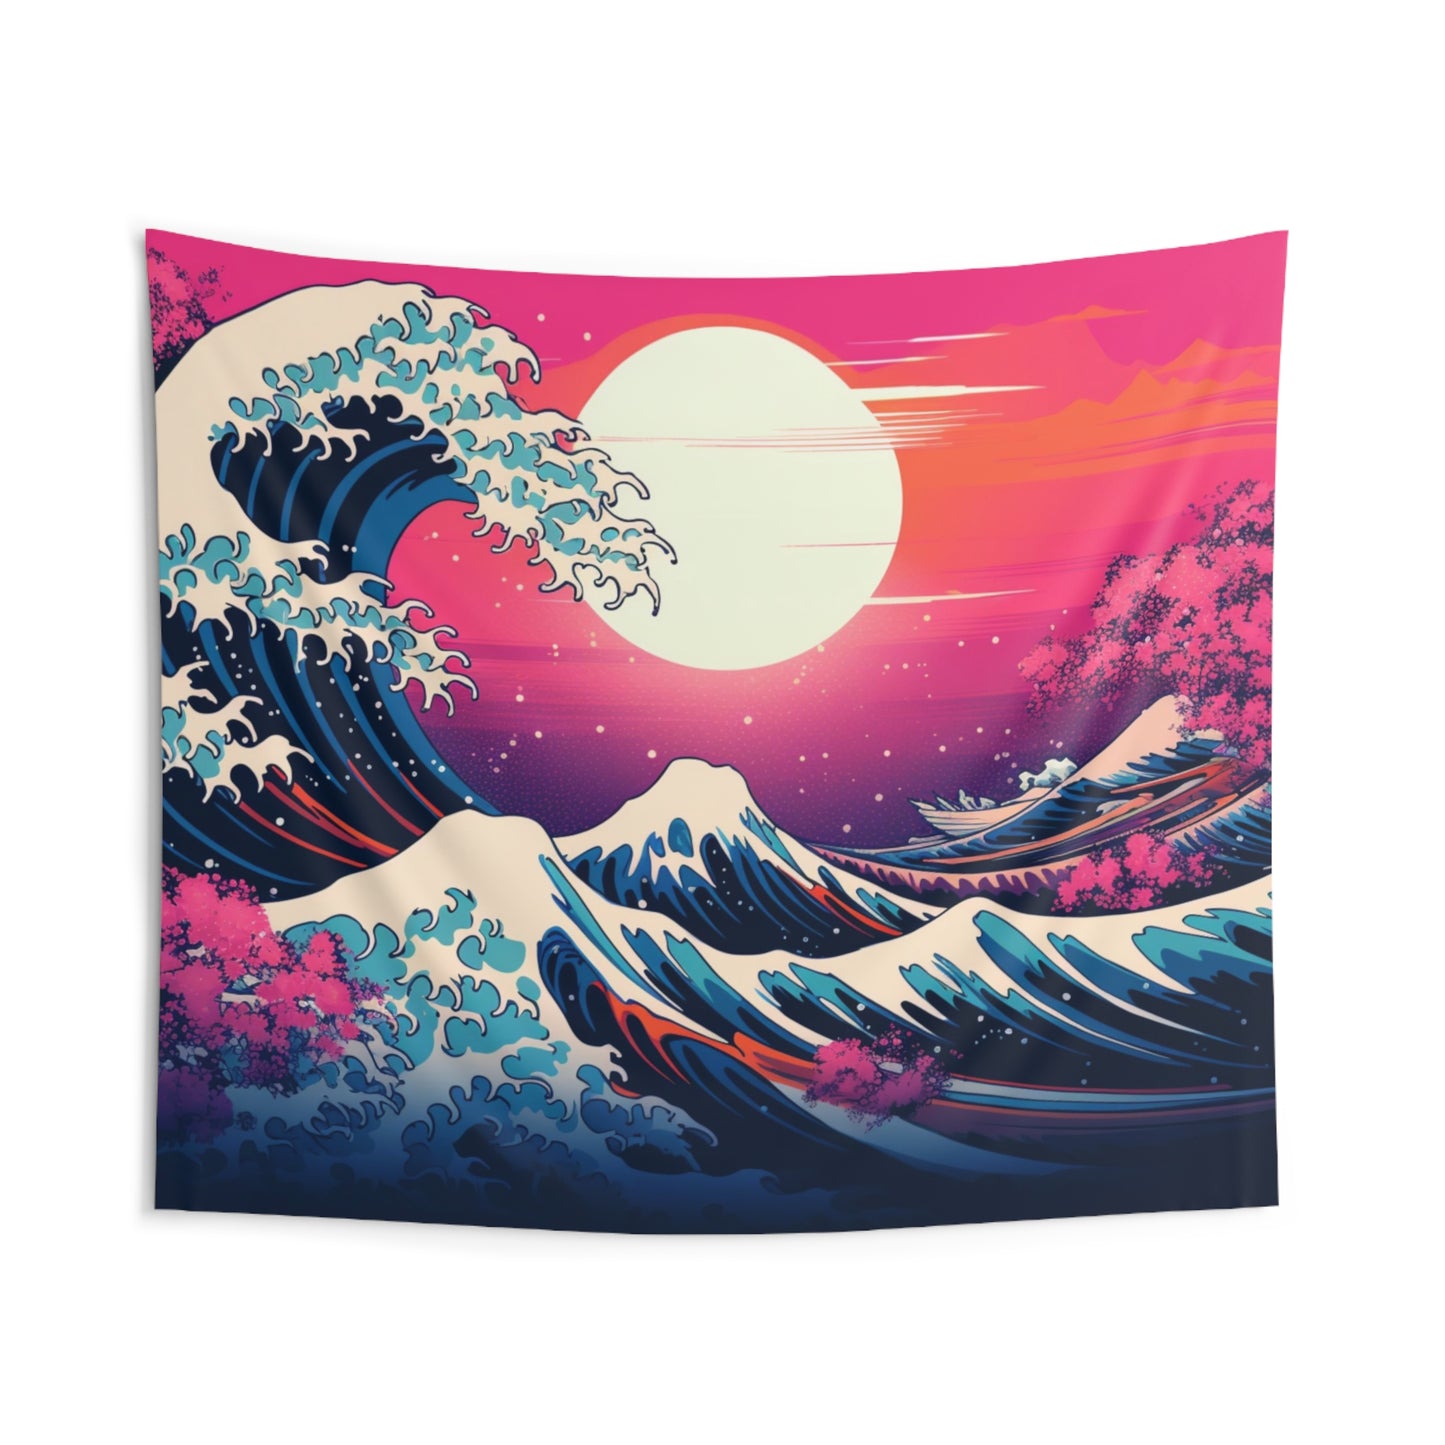 Great Wave Vaporwave Tapestry, Synthwave Japanese 80s 90s Wall Art Hanging Cool Unique Landscape Aesthetic Large Small College Dorm Starcove Fashion